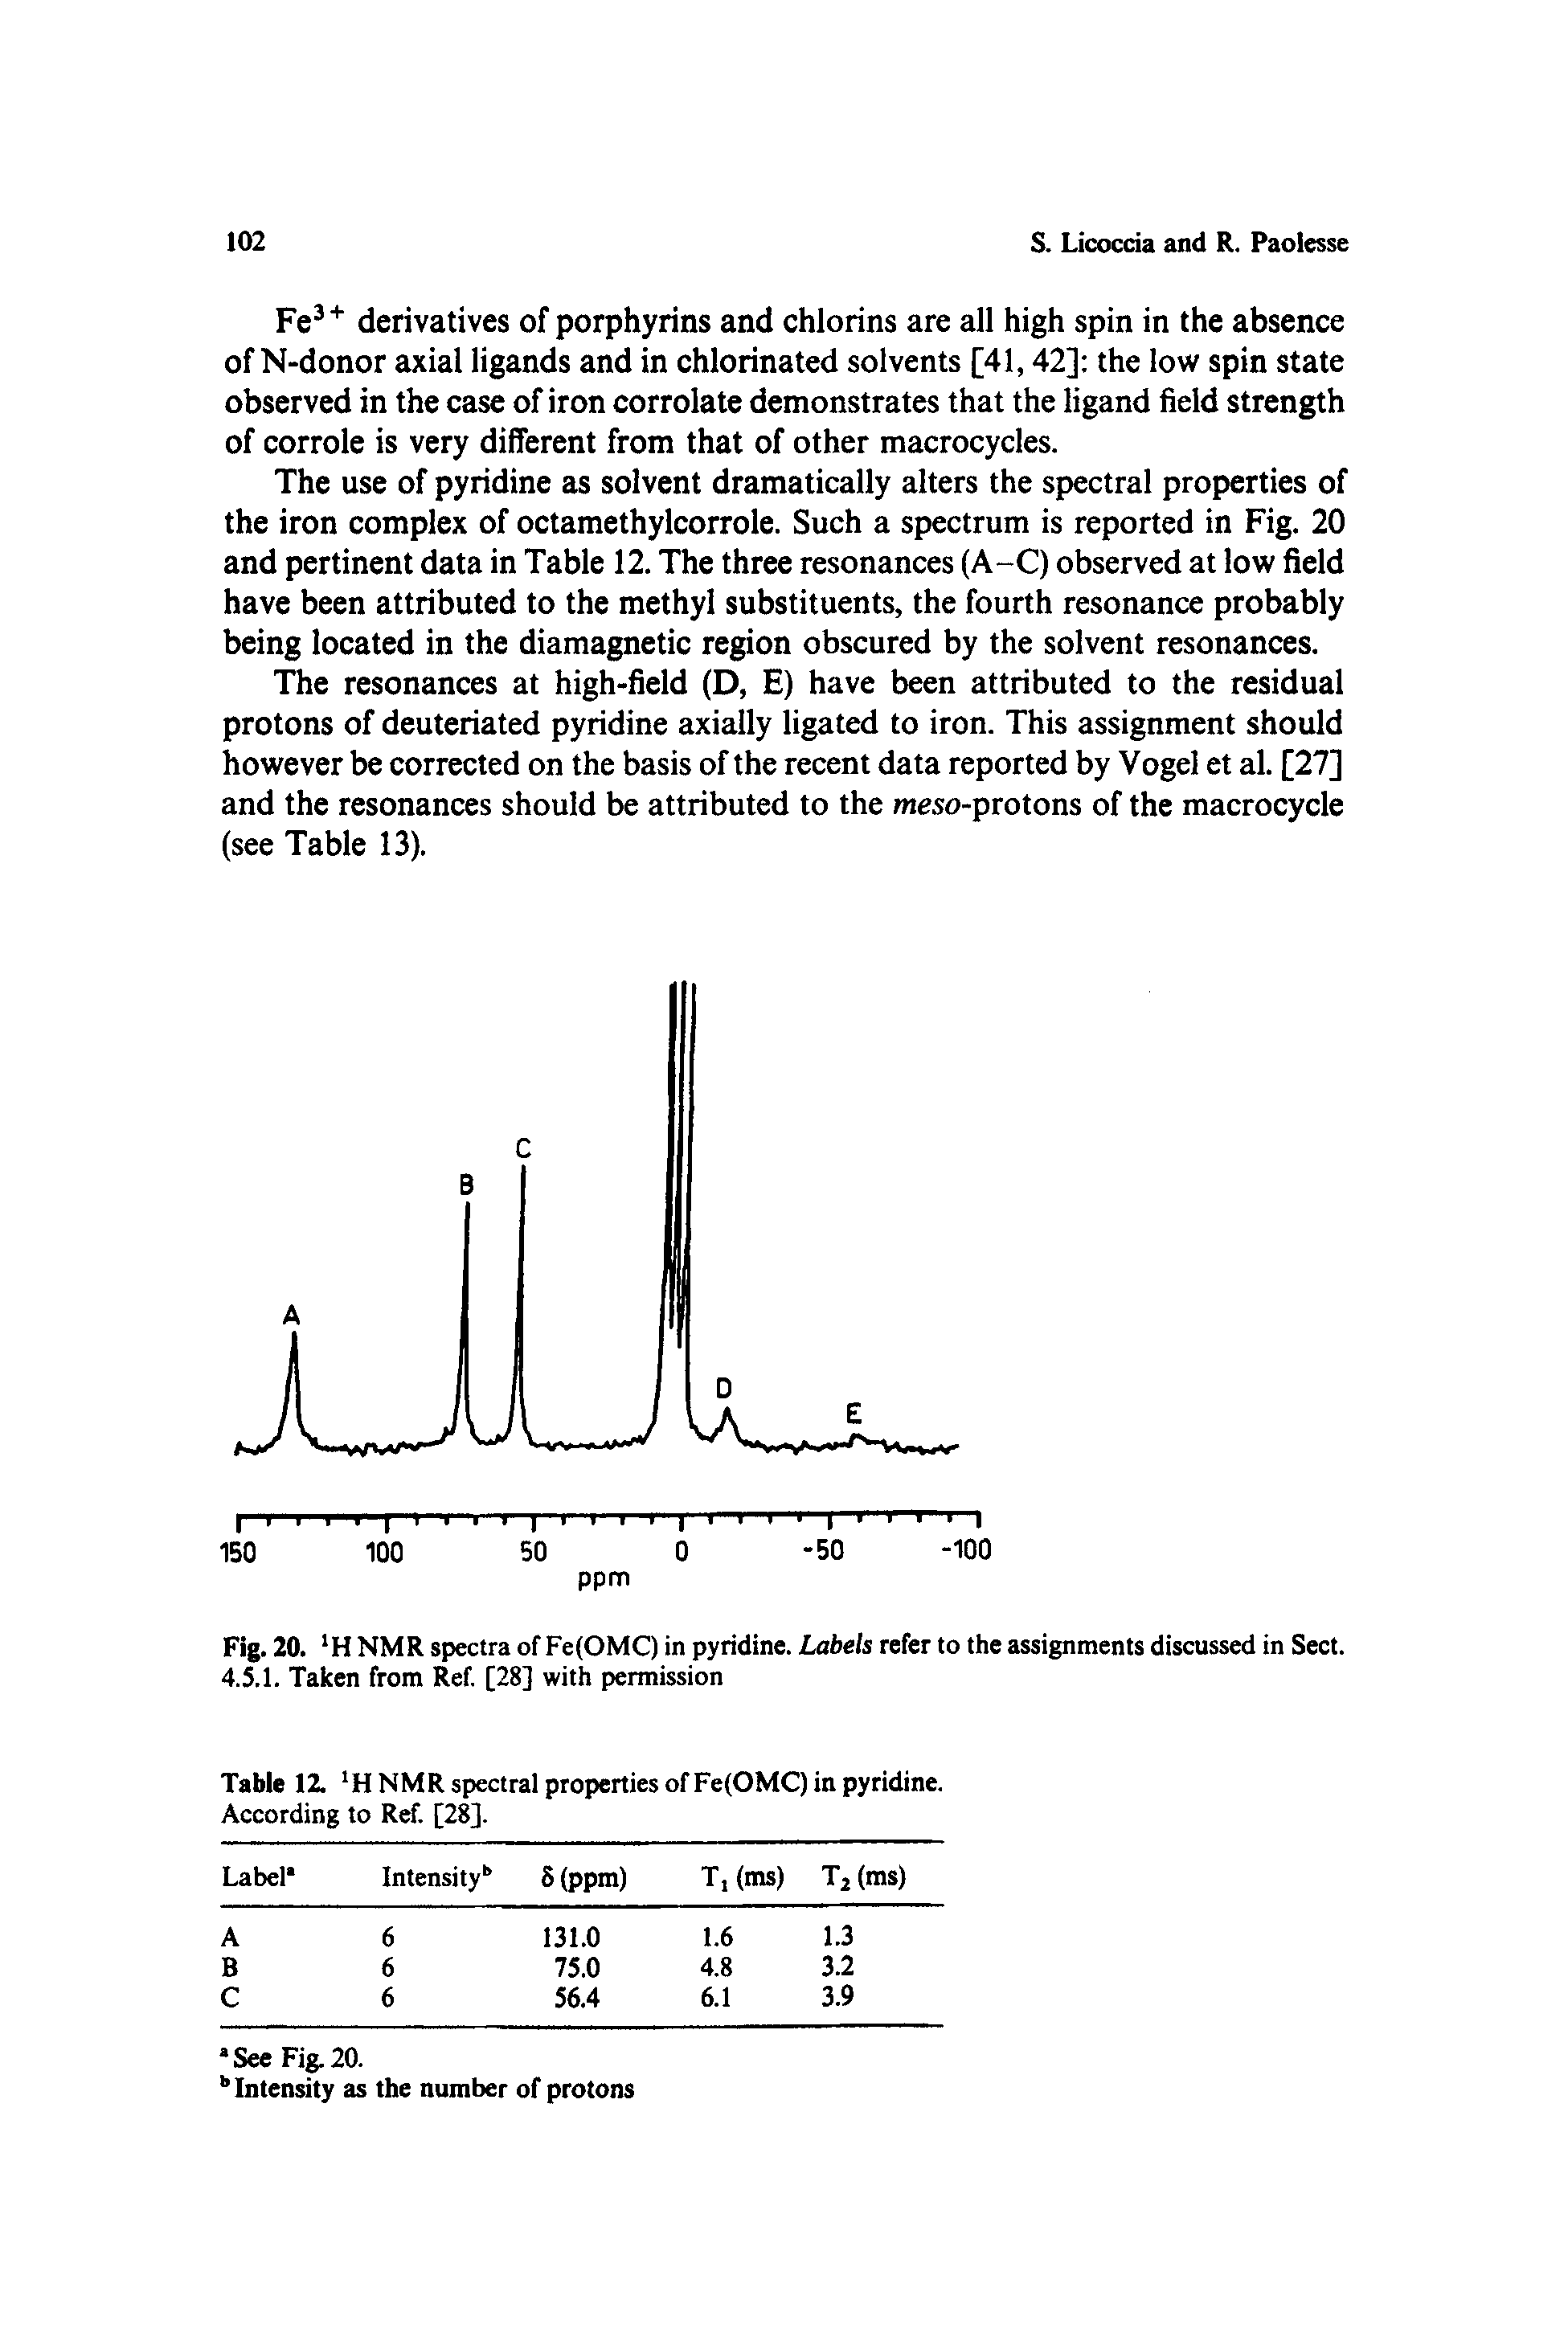 Fig. 20. H NMR spectra of Fe(OMC) in pyridine. Labels refer to the assignments discussed in Sect. 4.5.1. Taken from Ref. [28] with permission...